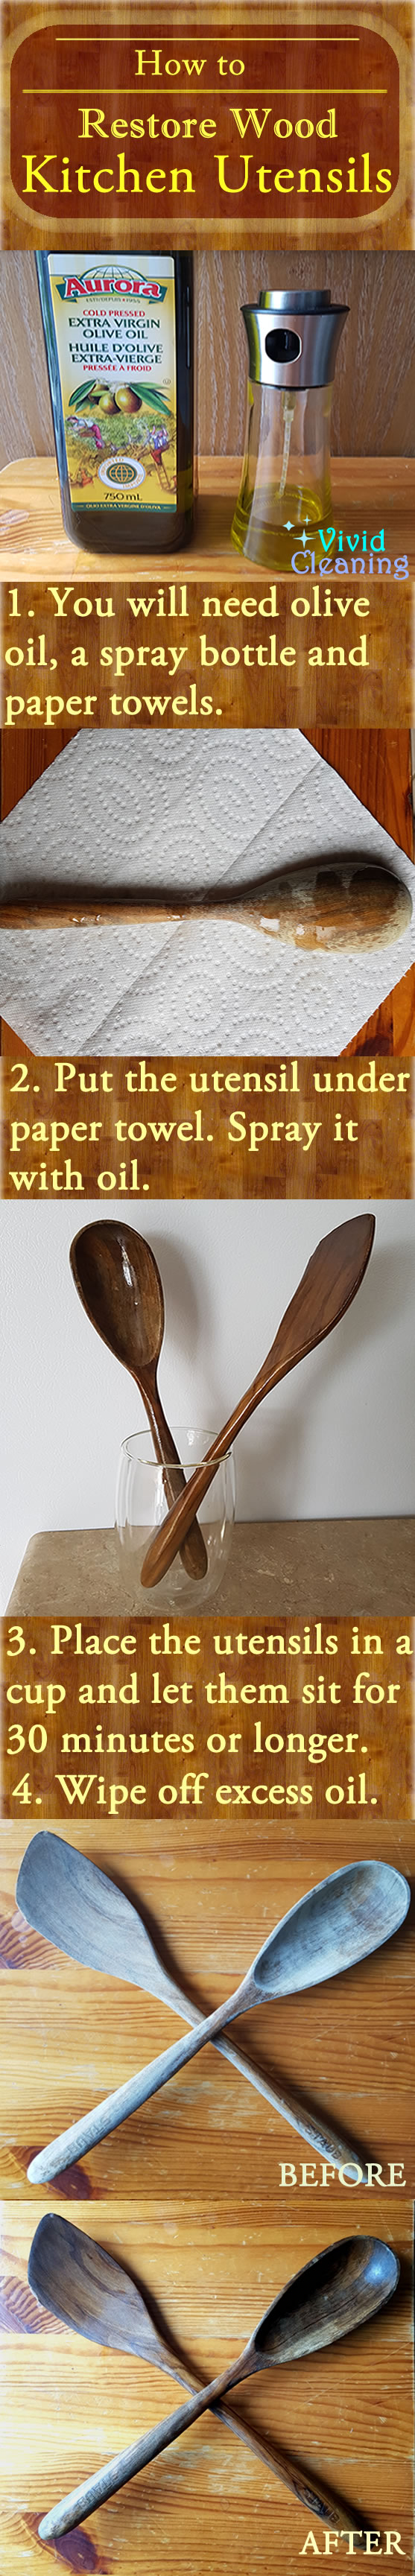 How to Restore Wood Kitchen Utensils 1. You will need olive oil, a spray bottle and paper towels. 2. Put the utensil under paper towel. Spray it with oil. 3. Place the utensils in a cup and let them sit for30 minutes or longer. 4. Wipe off excess oil.